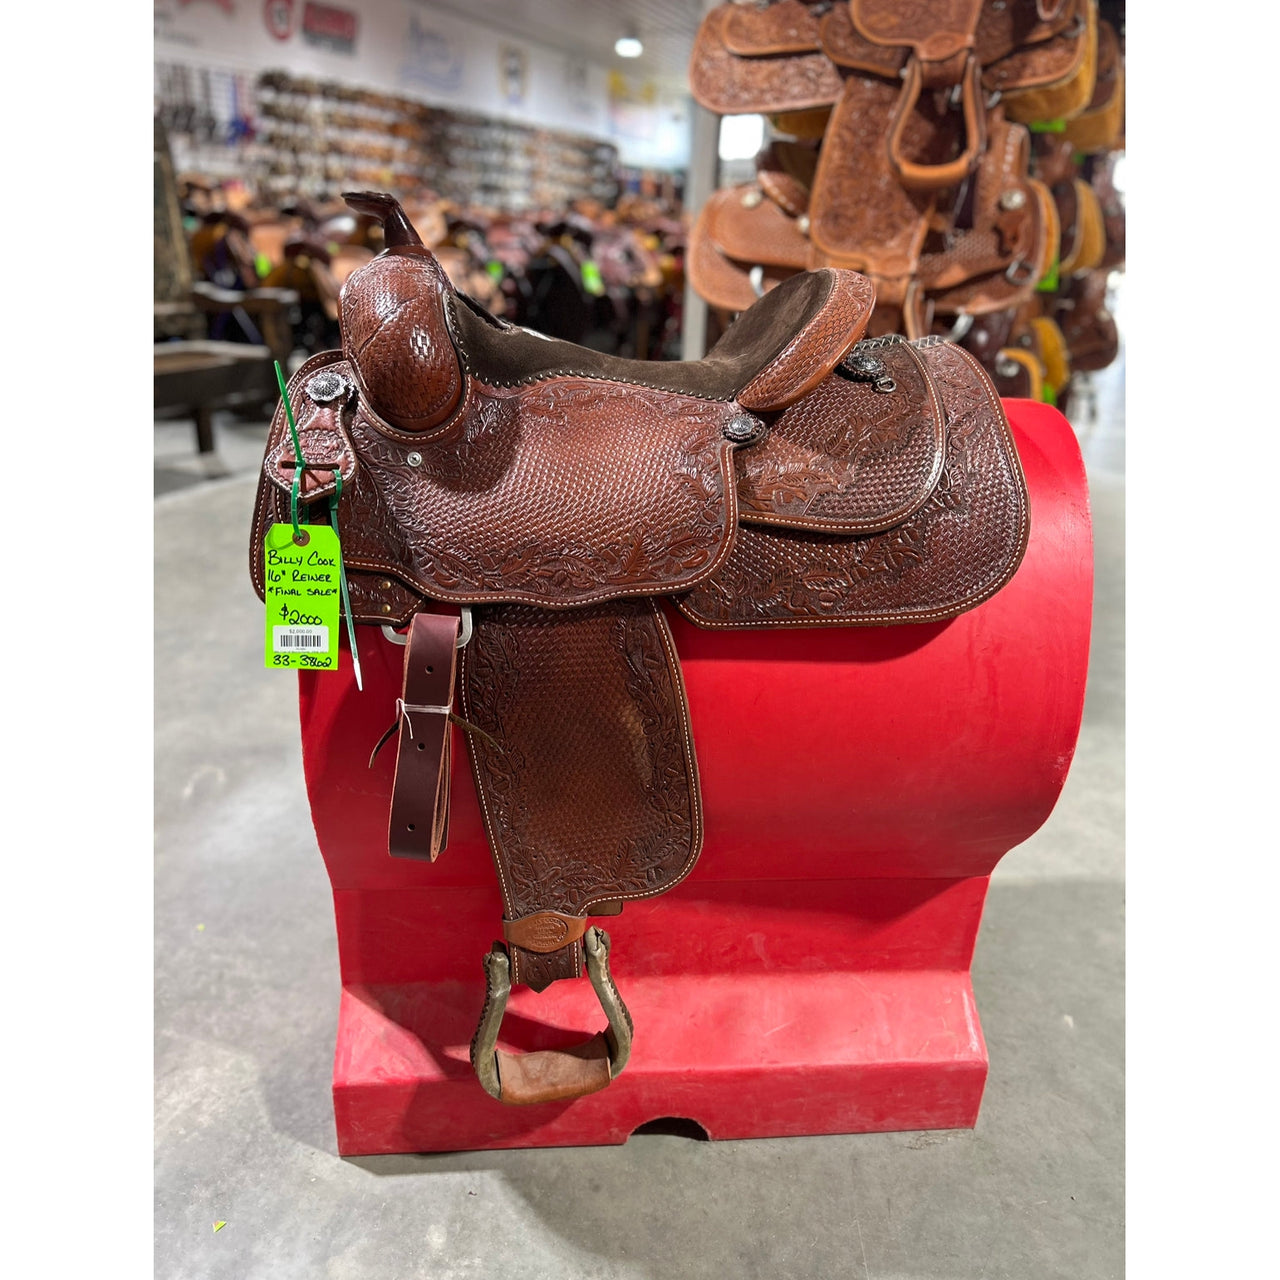 Billy Cook 16" Reining Saddle - FINAL SALE